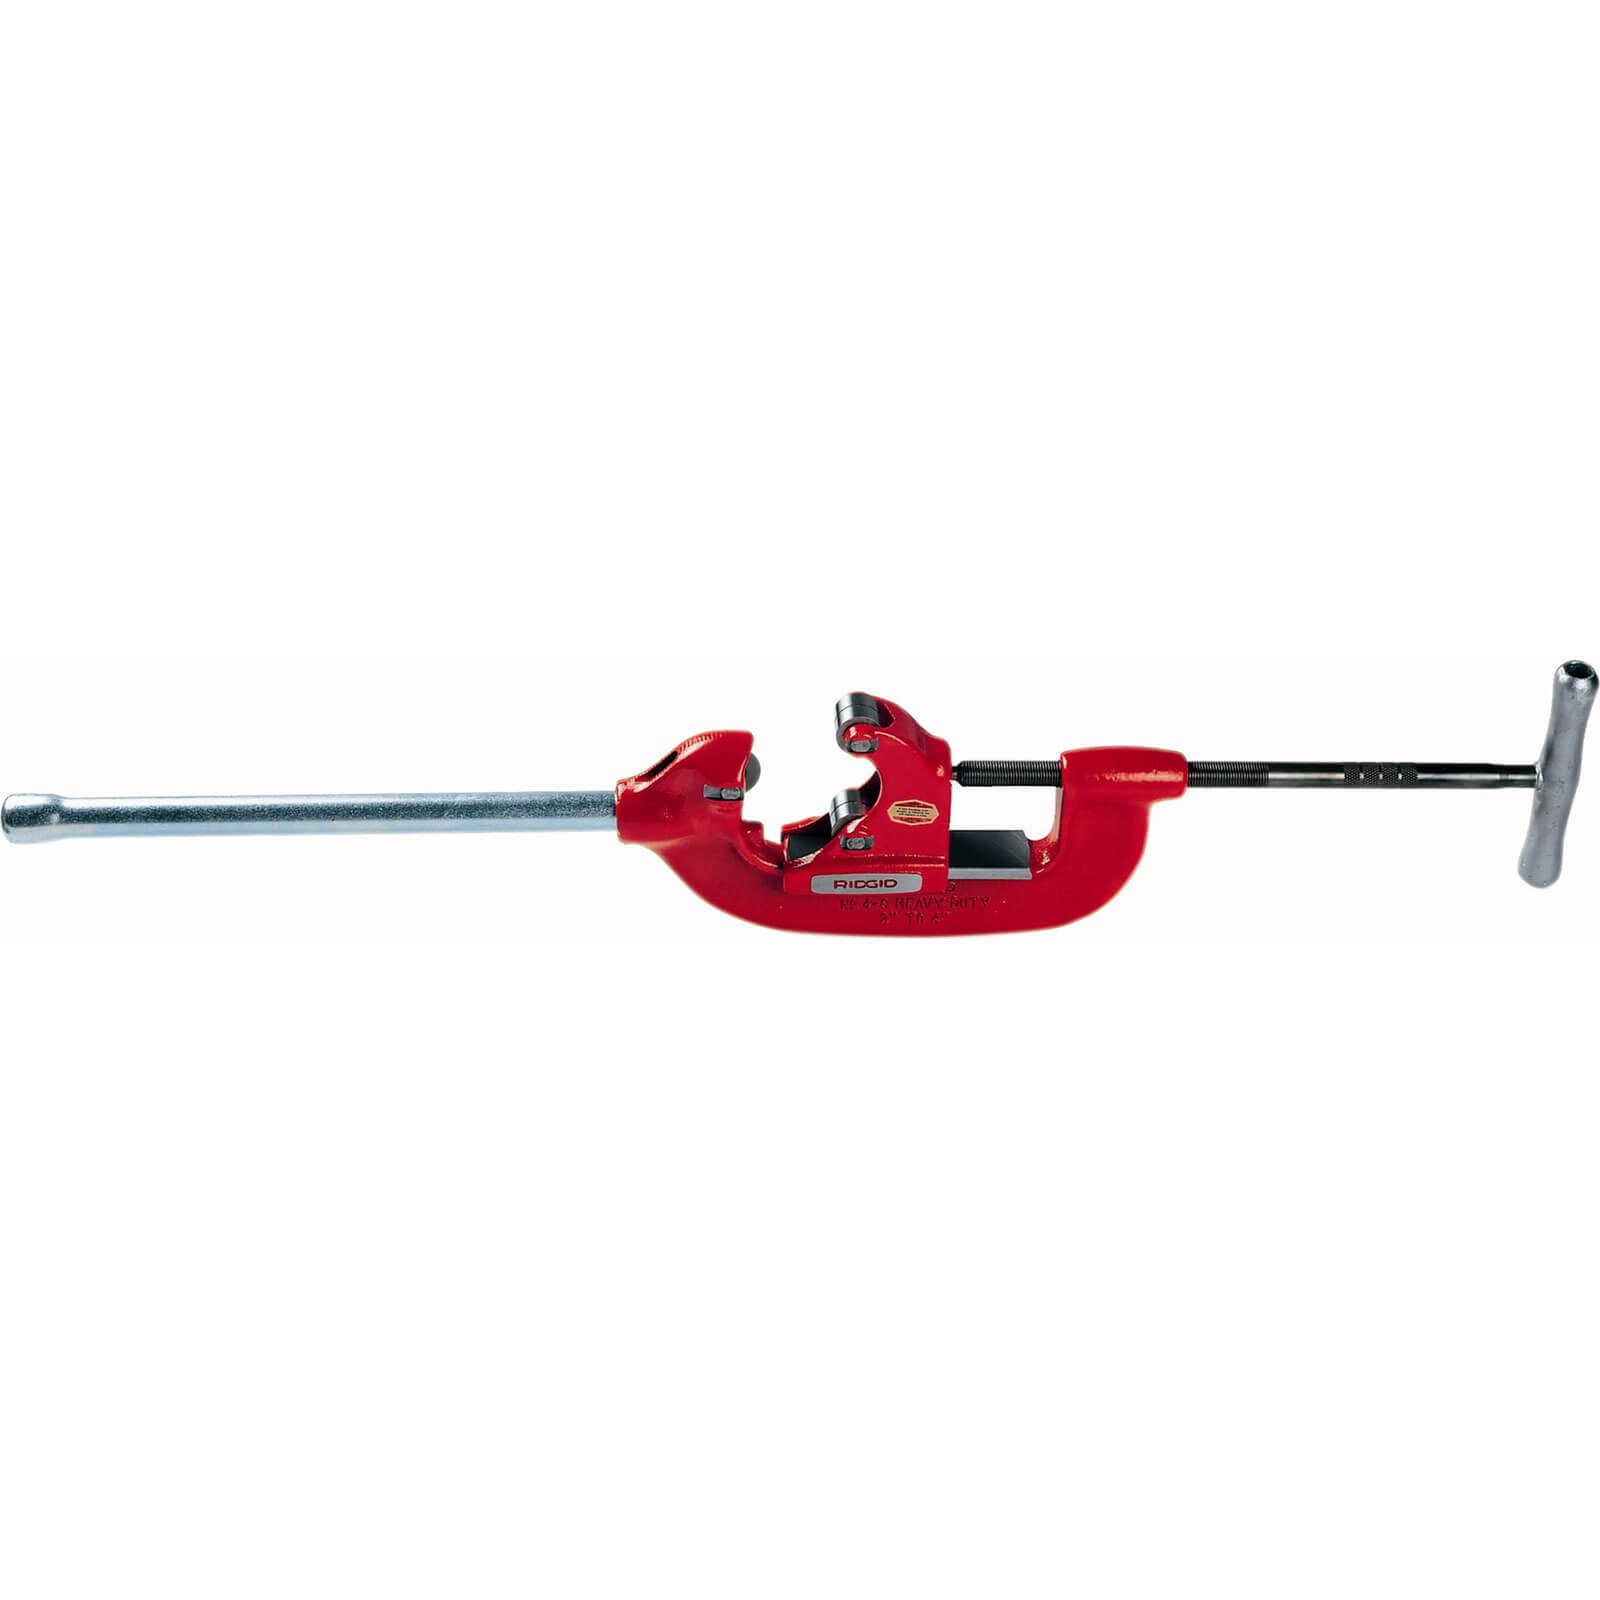 Image of Ridgid 2 Handle Heavy Duty Adjustable Pipe Cutter 25mm - 80mm